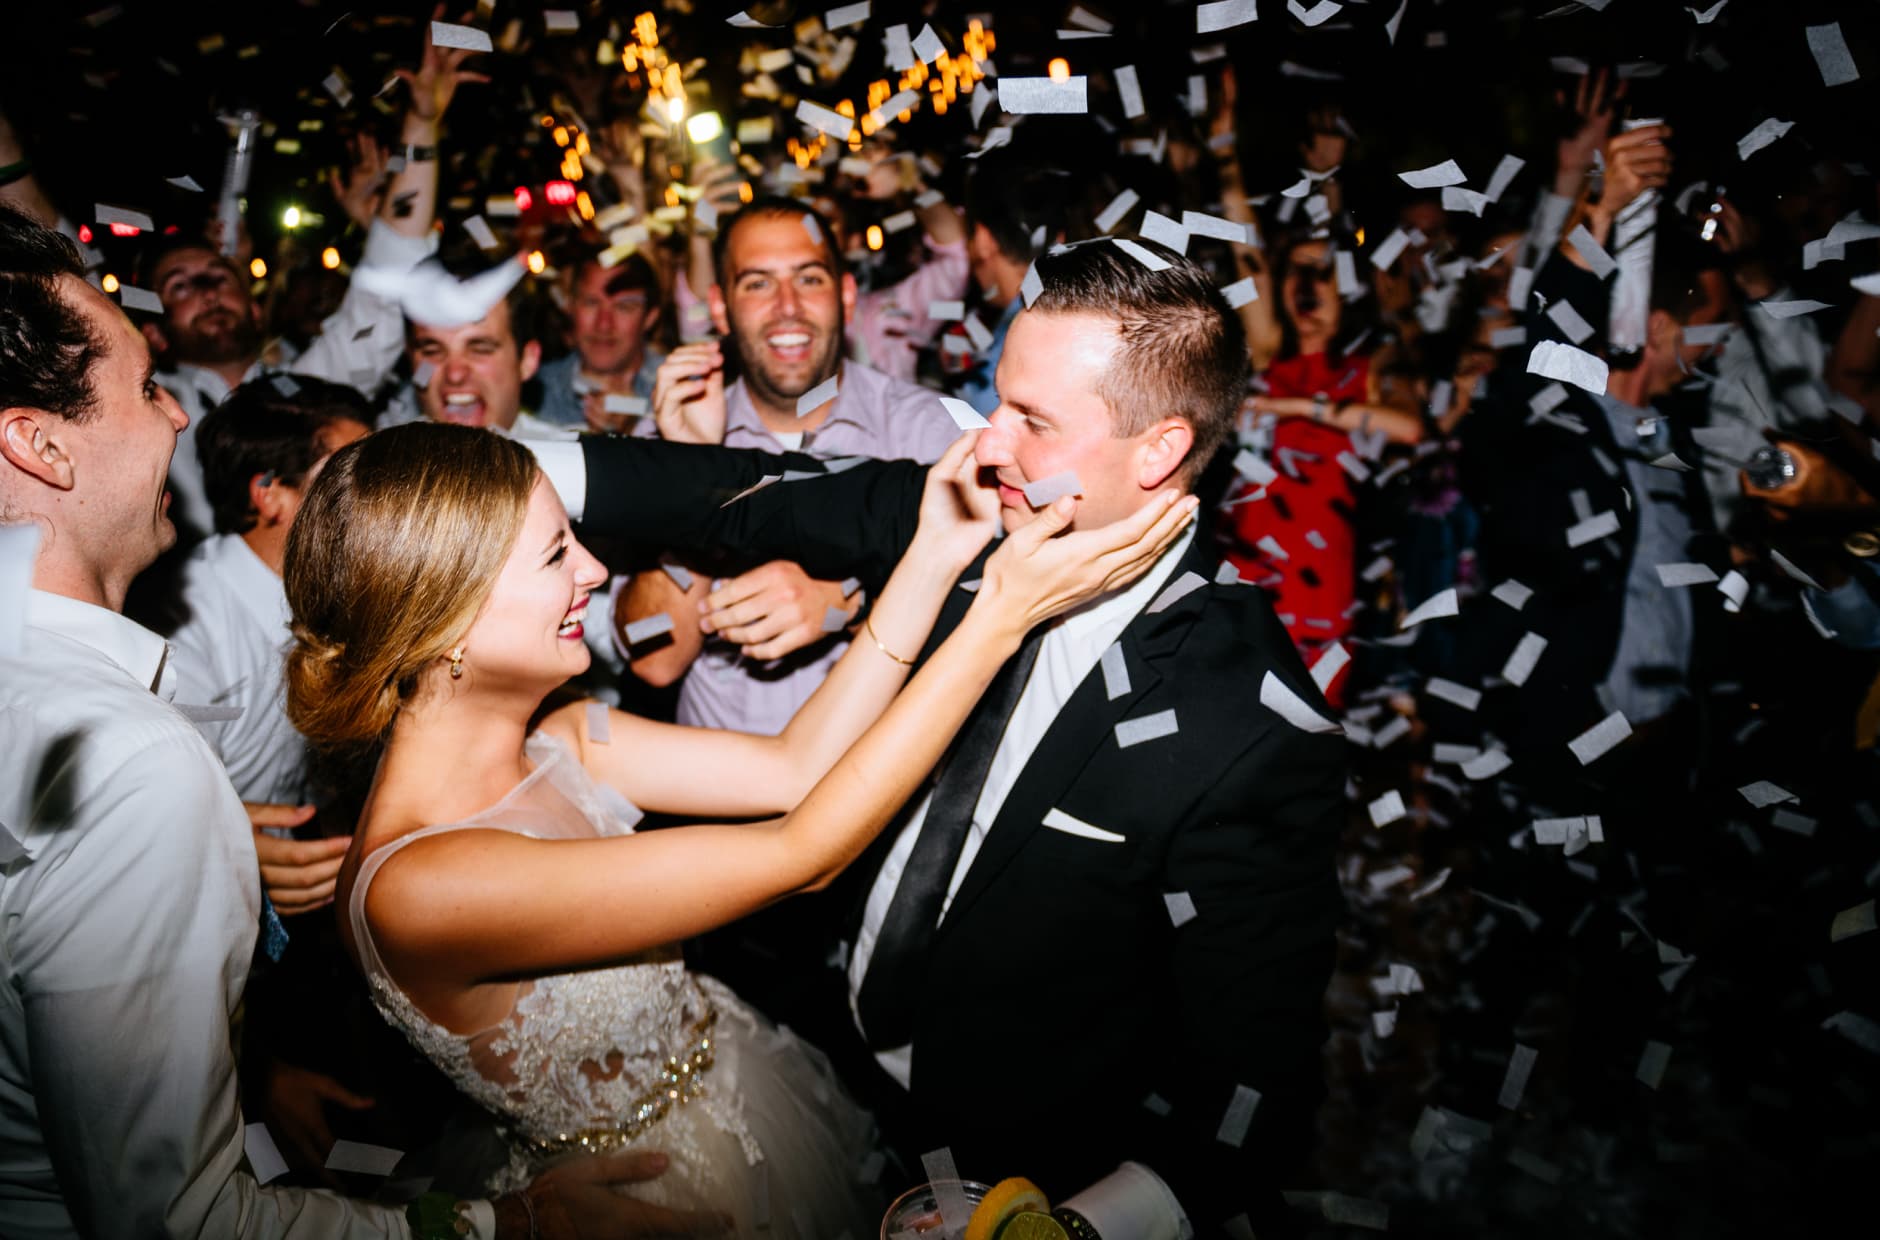 Amidst a lot of confetti, a bride touches the face of the groom, surrounded by family and friends.